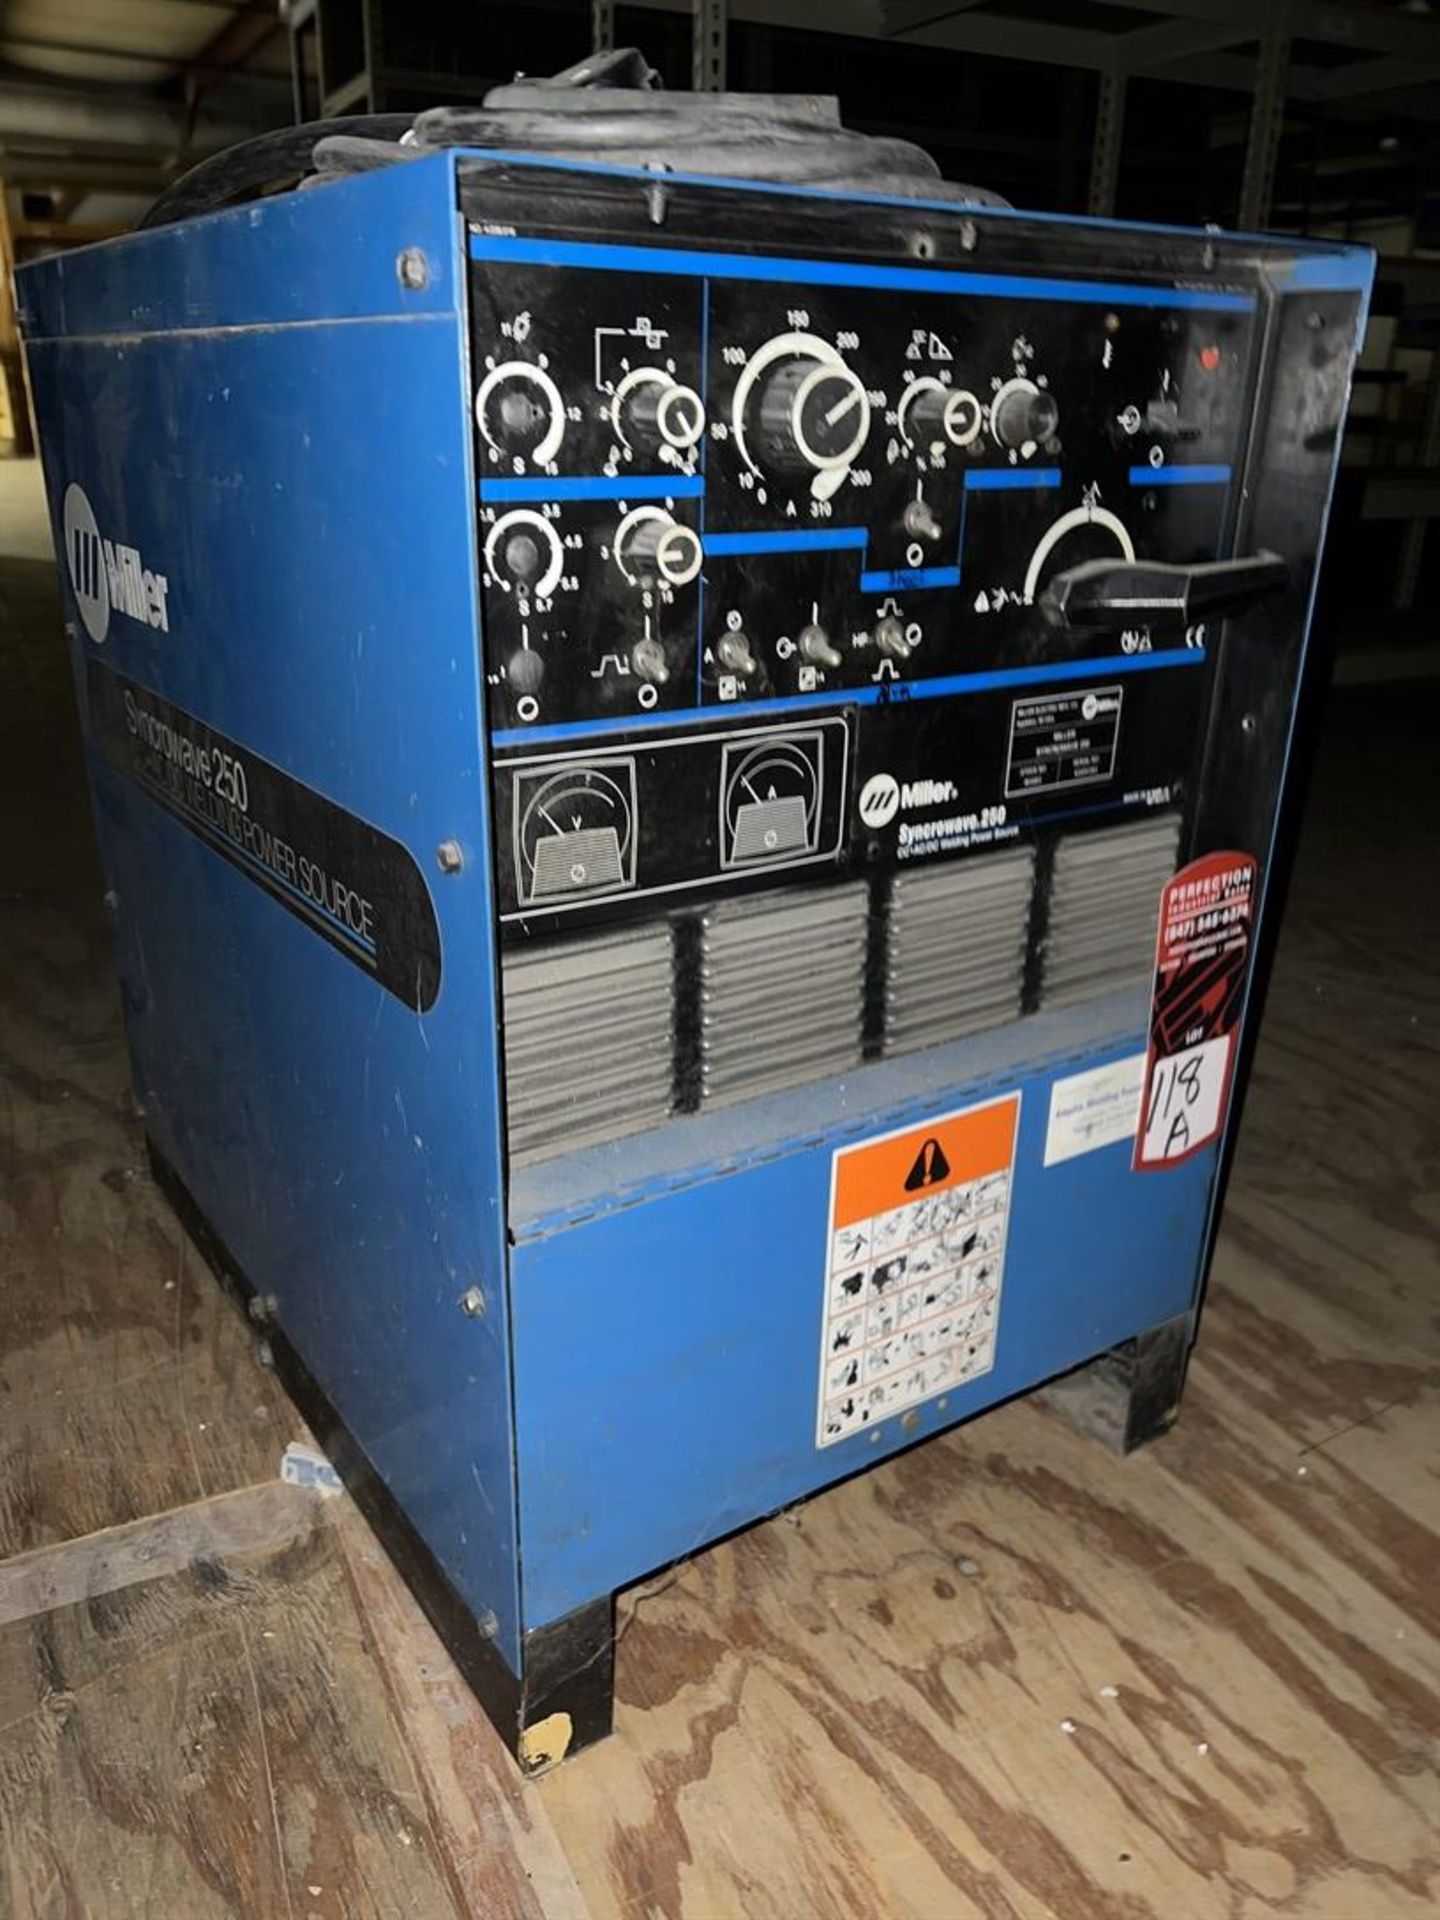 Miller Syncrowave 250 CC.AC/DC Welding Source (no cables or leads) located upstairs - Image 2 of 3